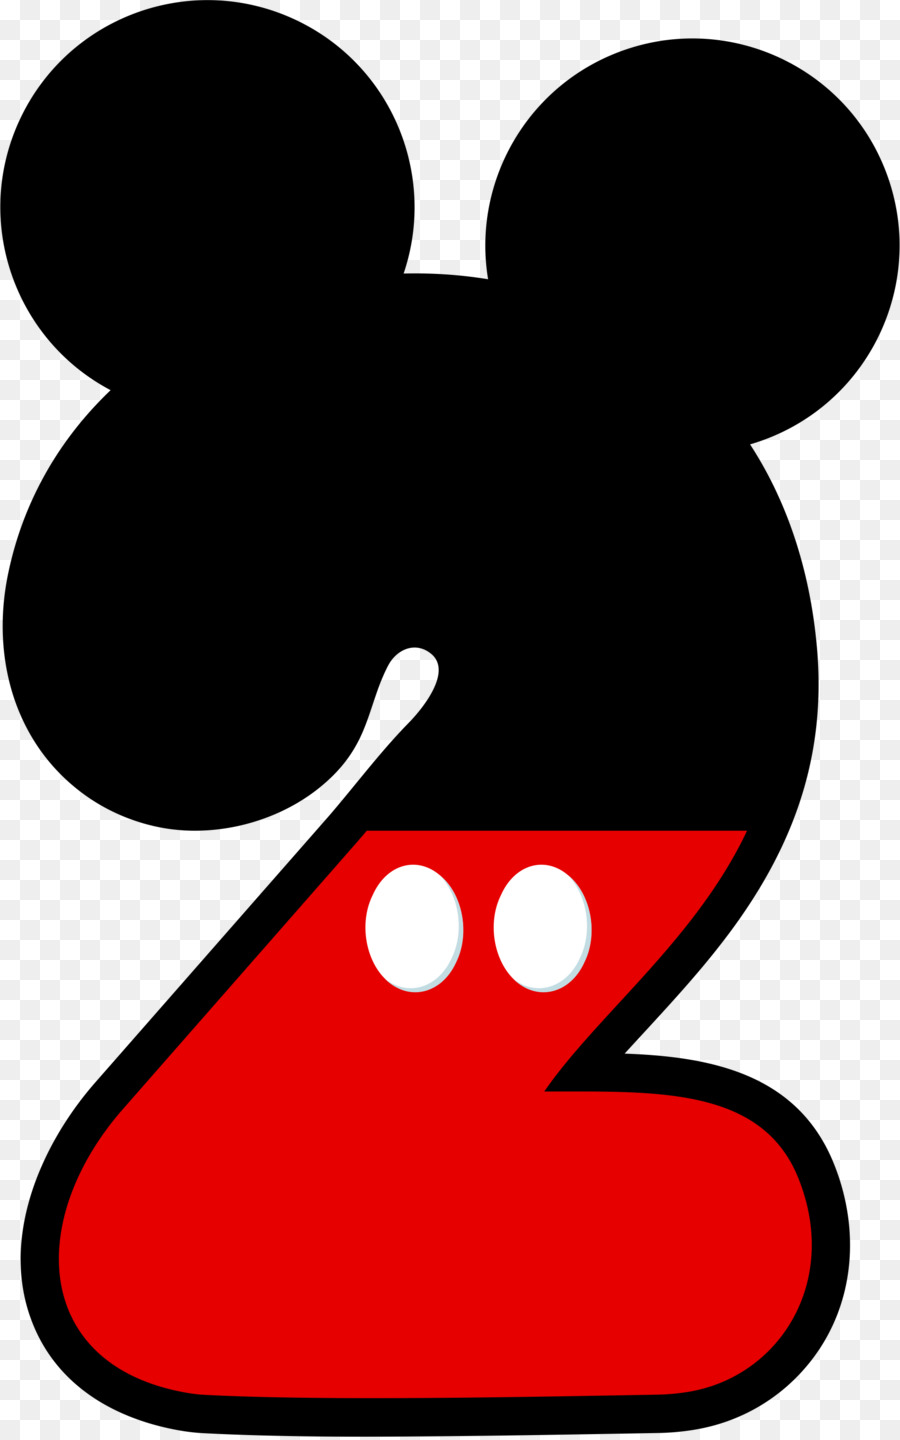 Minnie epic the power. 2 clipart mickey mouse